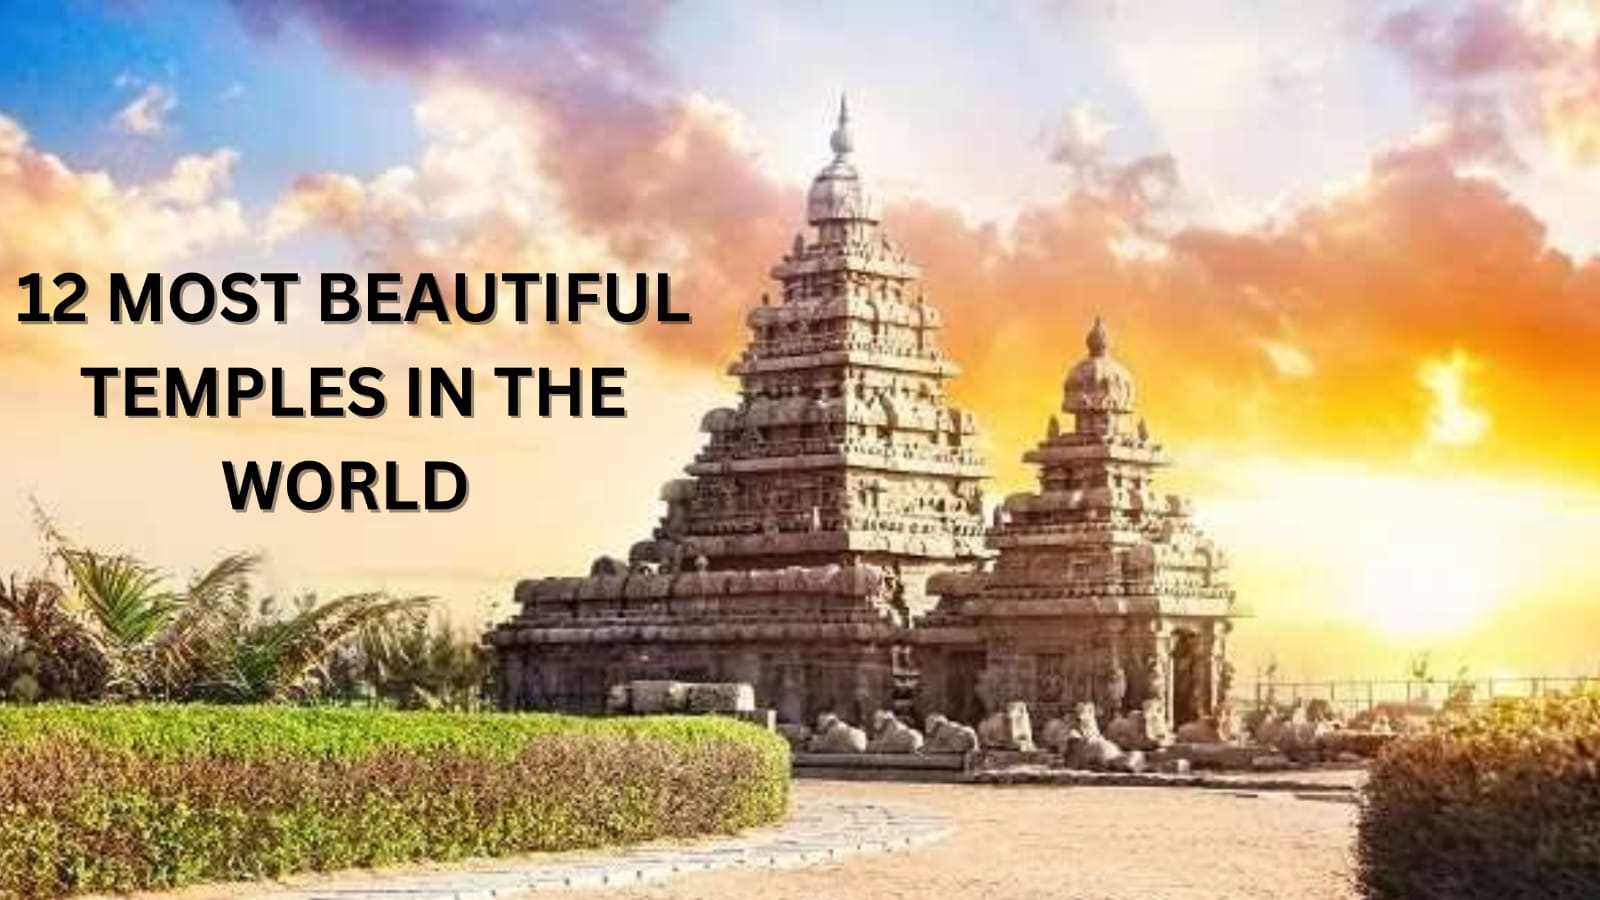 8 MOST BEAUTIFUL TEMPLES IN THE WORLD